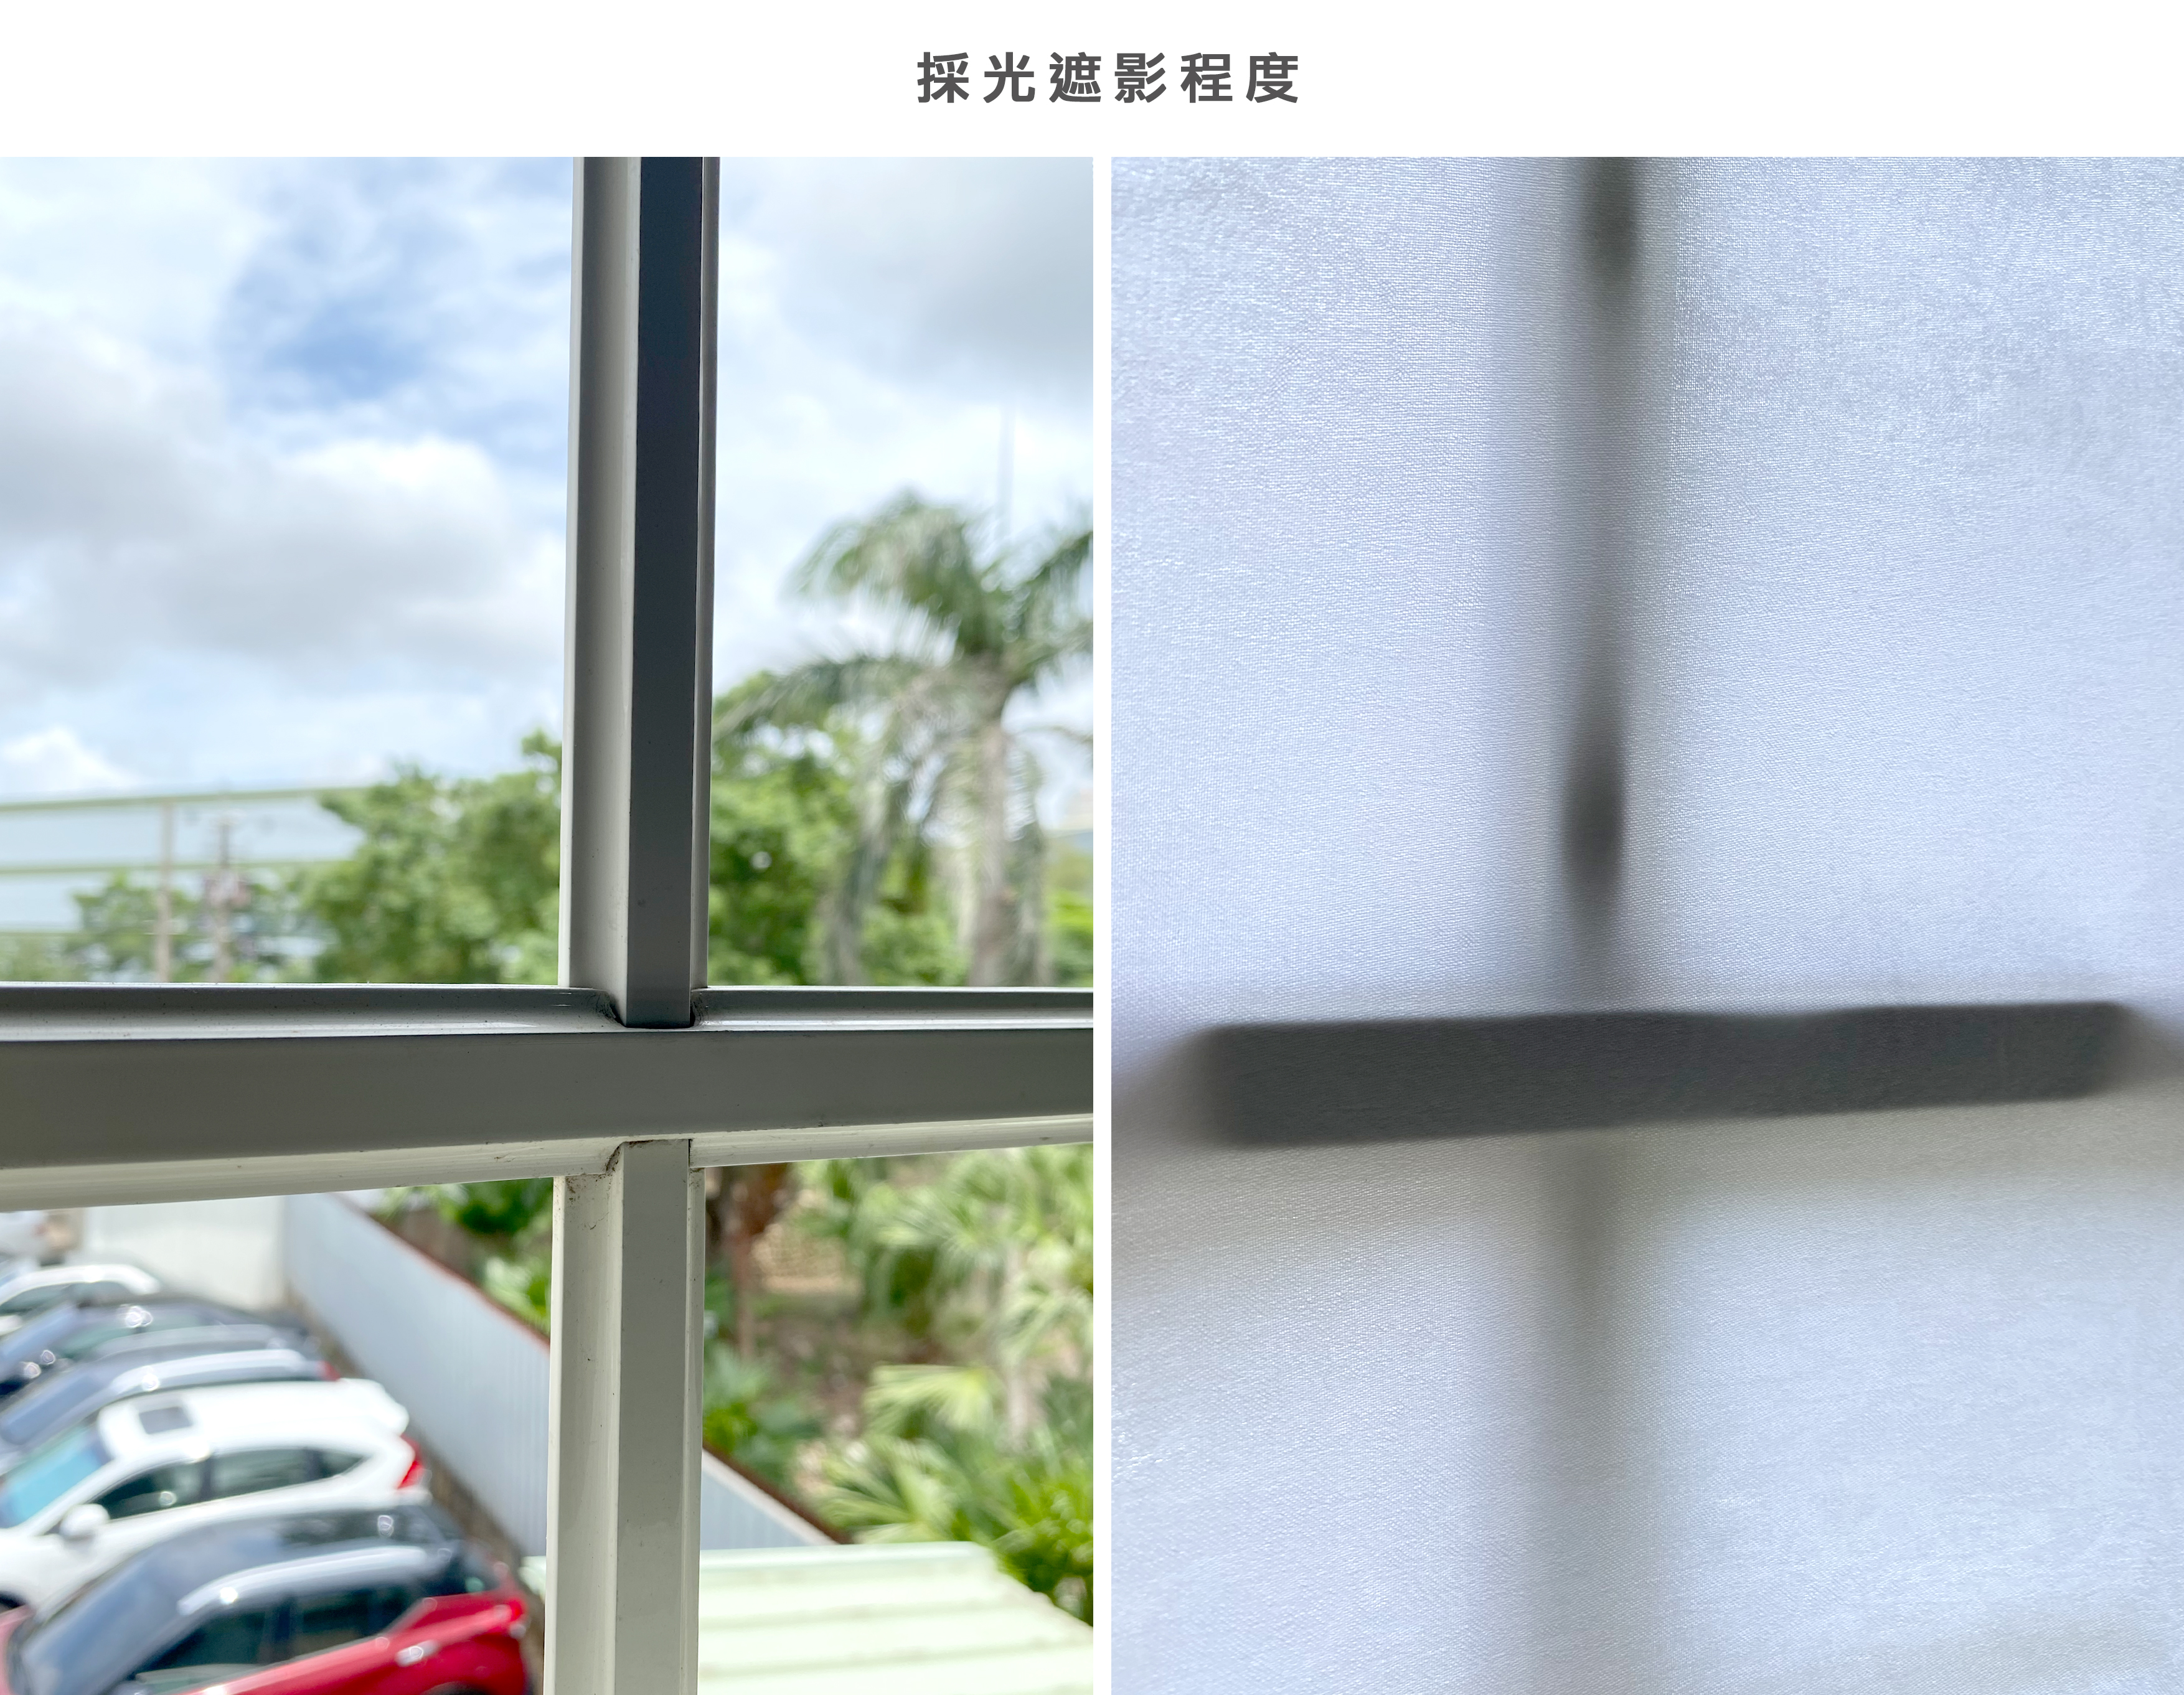 Lo-Fi House Select Curtains　Sheer Milky Sheer - White Child Safety／Cordless Blinds & Shades Light Filtering Blinds & Shades Semi-Transparent Blinds & Shades Motorized Blinds／Smart Blinds & Shades